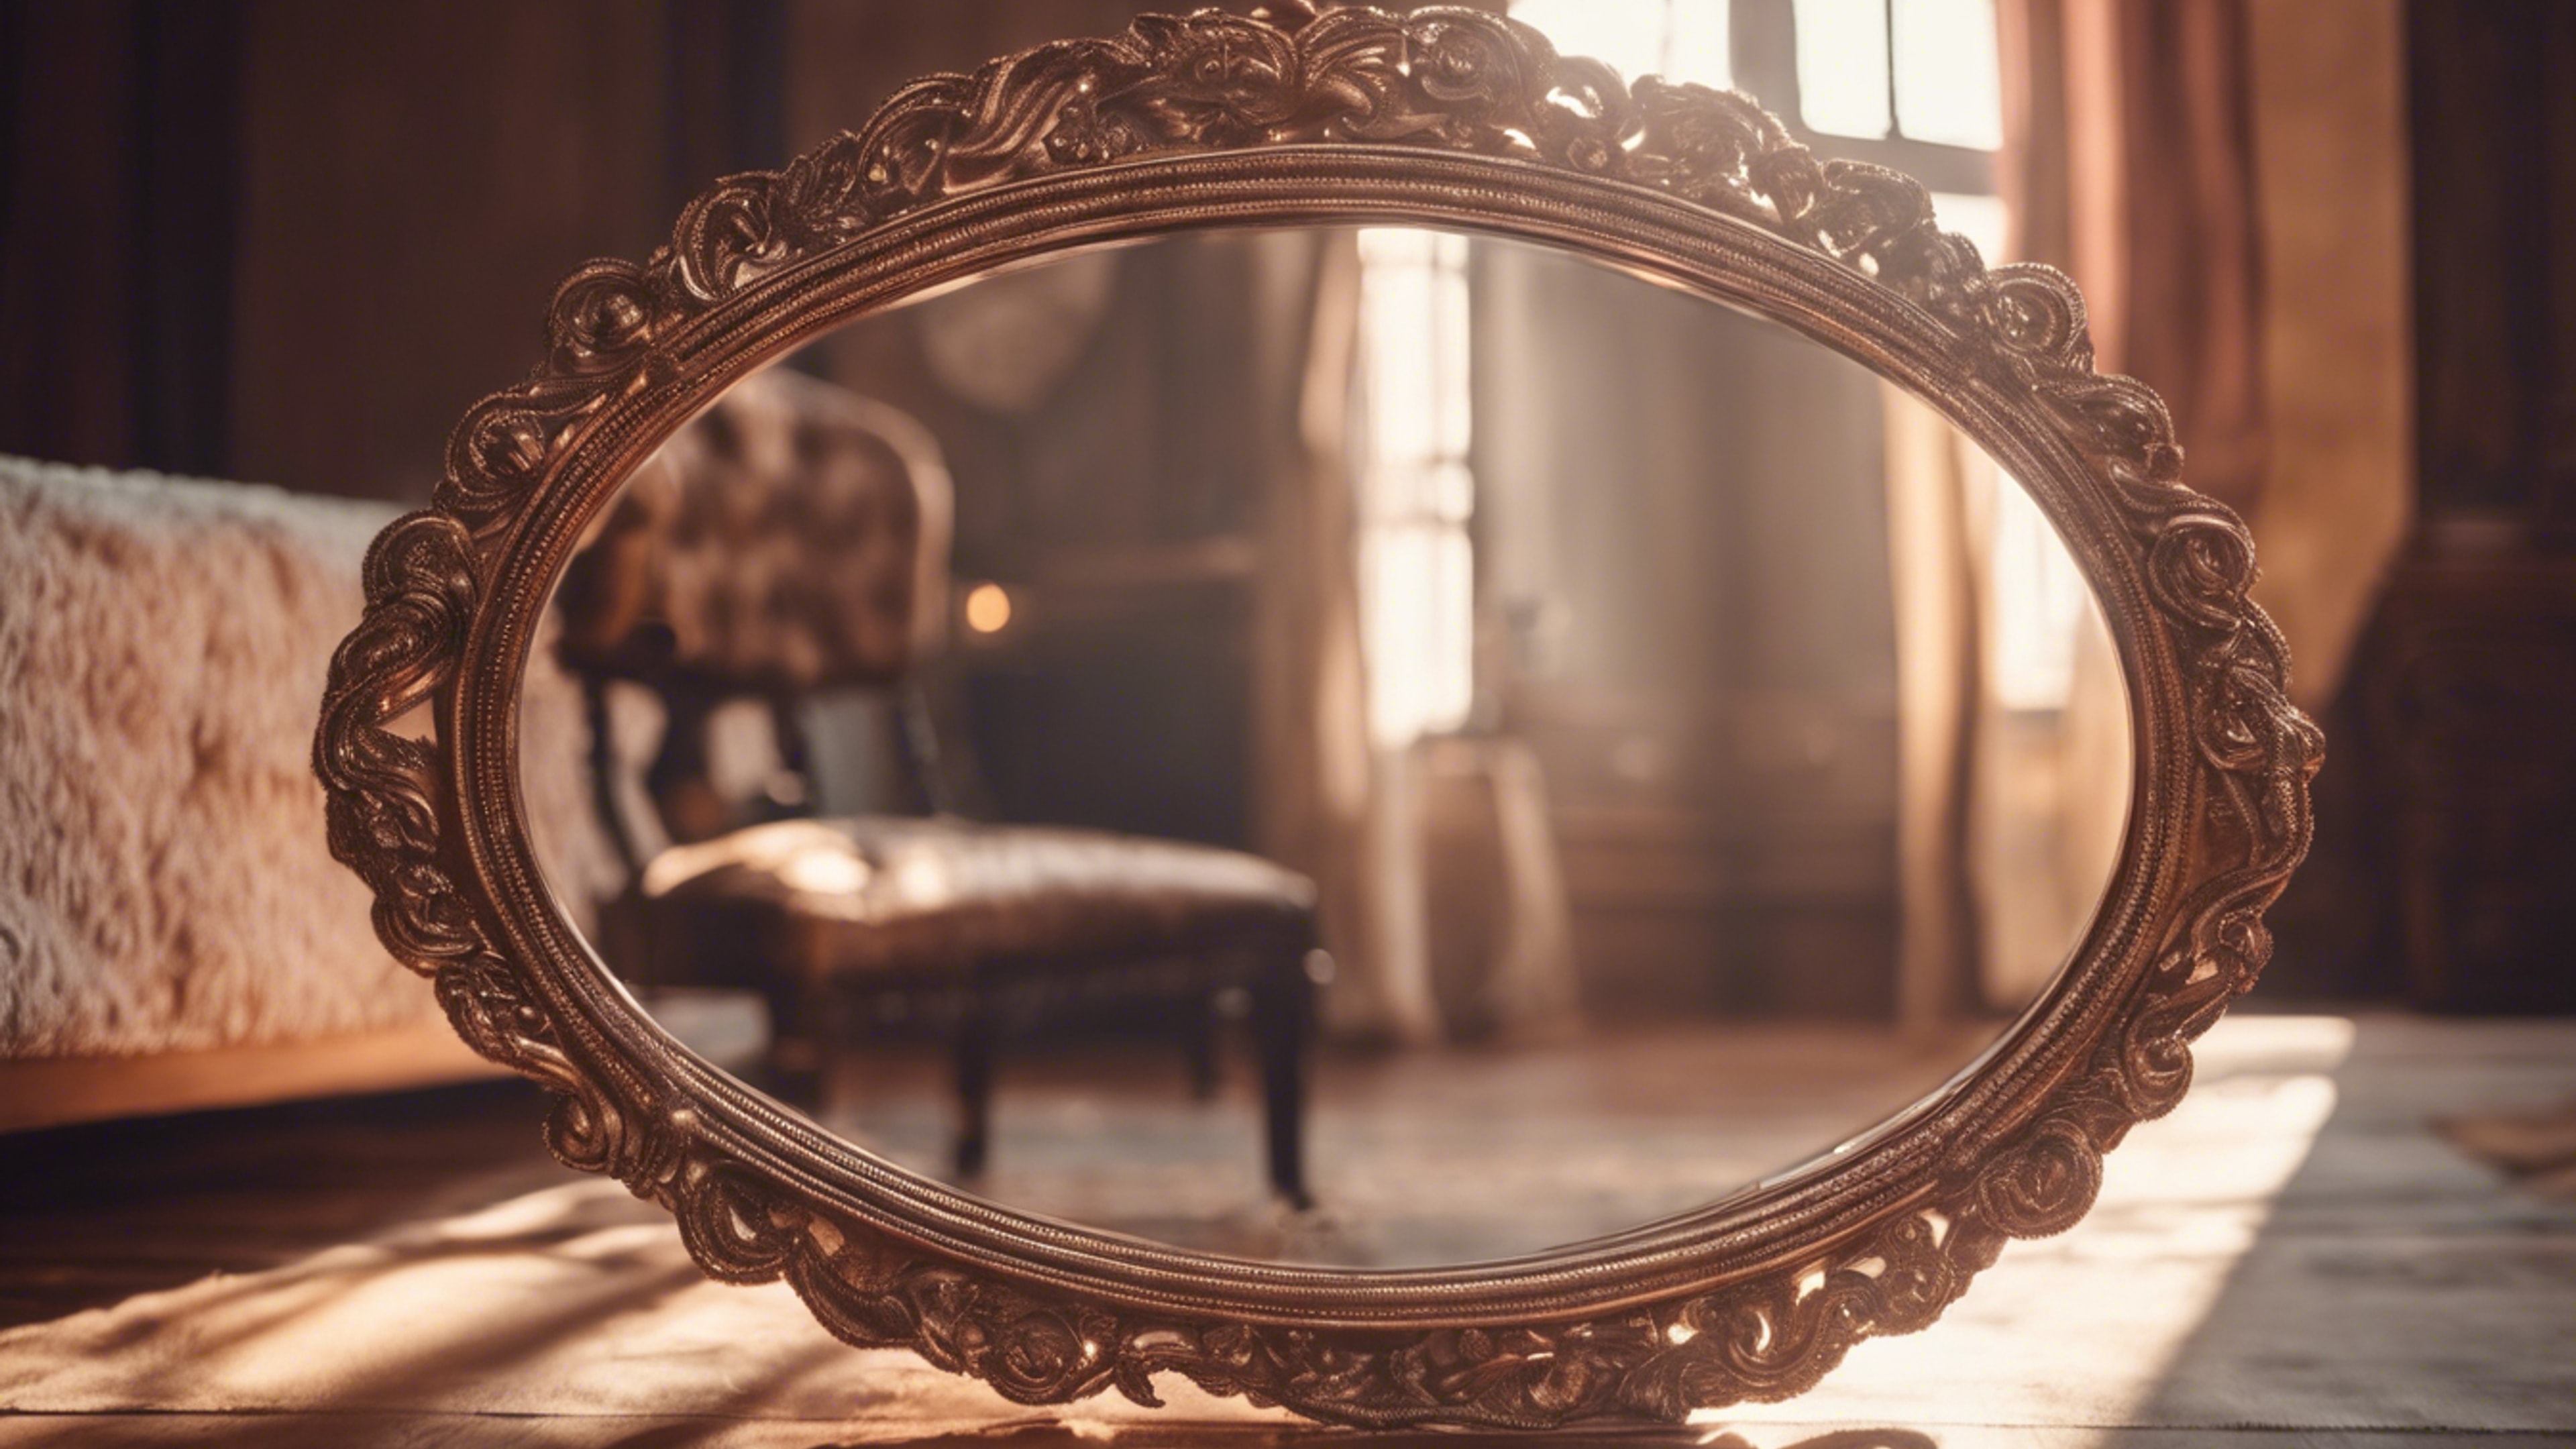 An antique rose gold mirror reflecting a sunlit, vintage-inspired room. วอลล์เปเปอร์[df758999a7b143f09983]